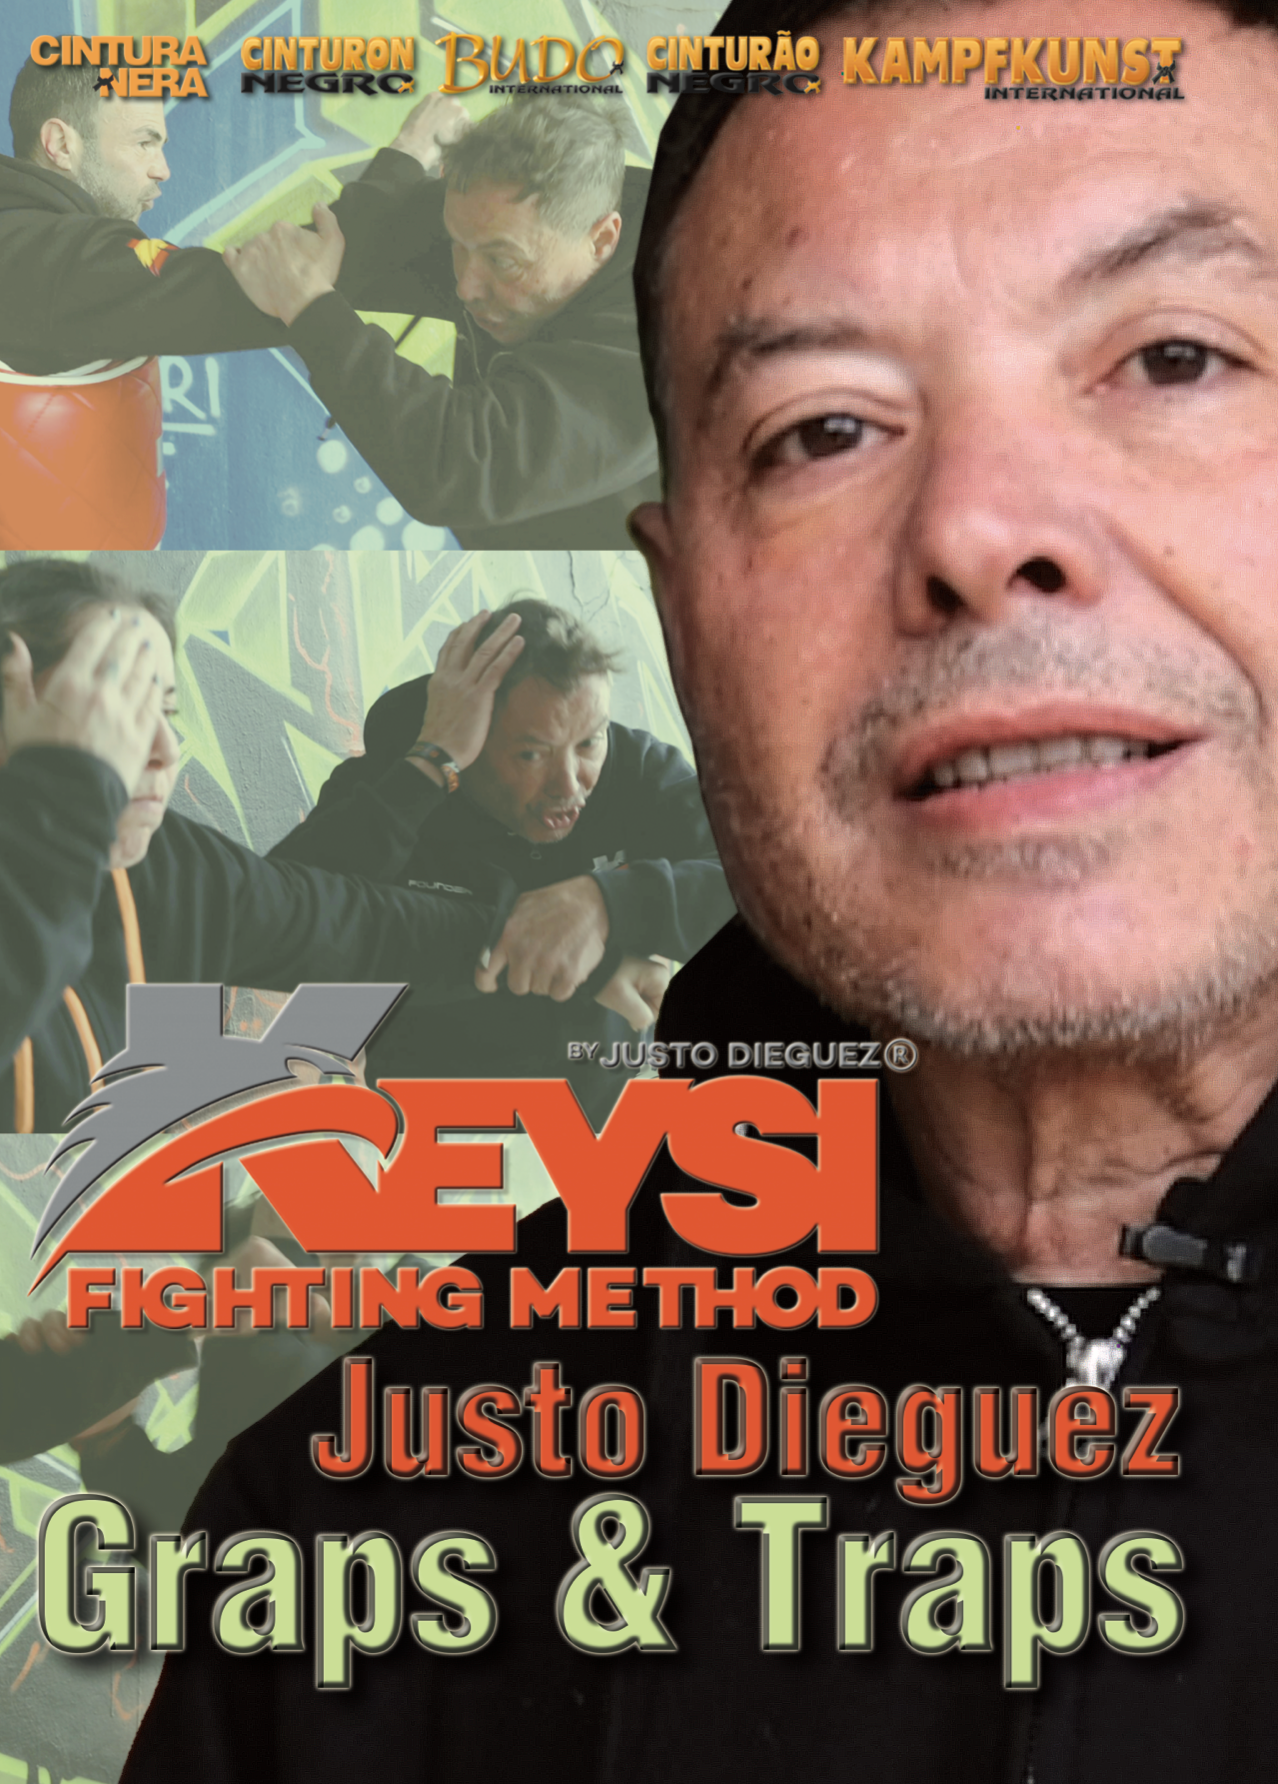 Keysi Grabs & Traps with Justo Dieguez (オンデマンド)